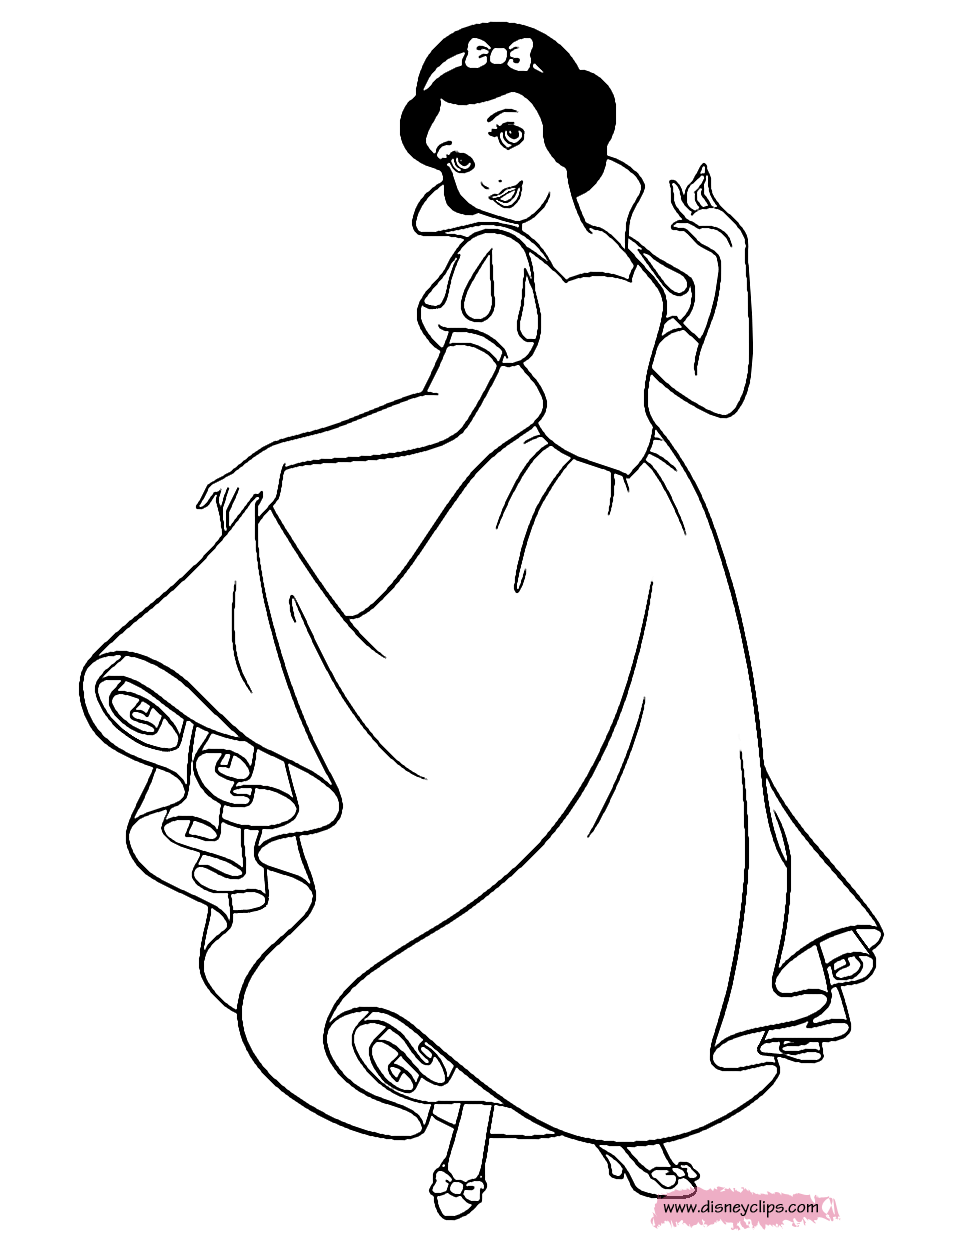 Snow White and the Seven Dwarfs Coloring Pages (2)